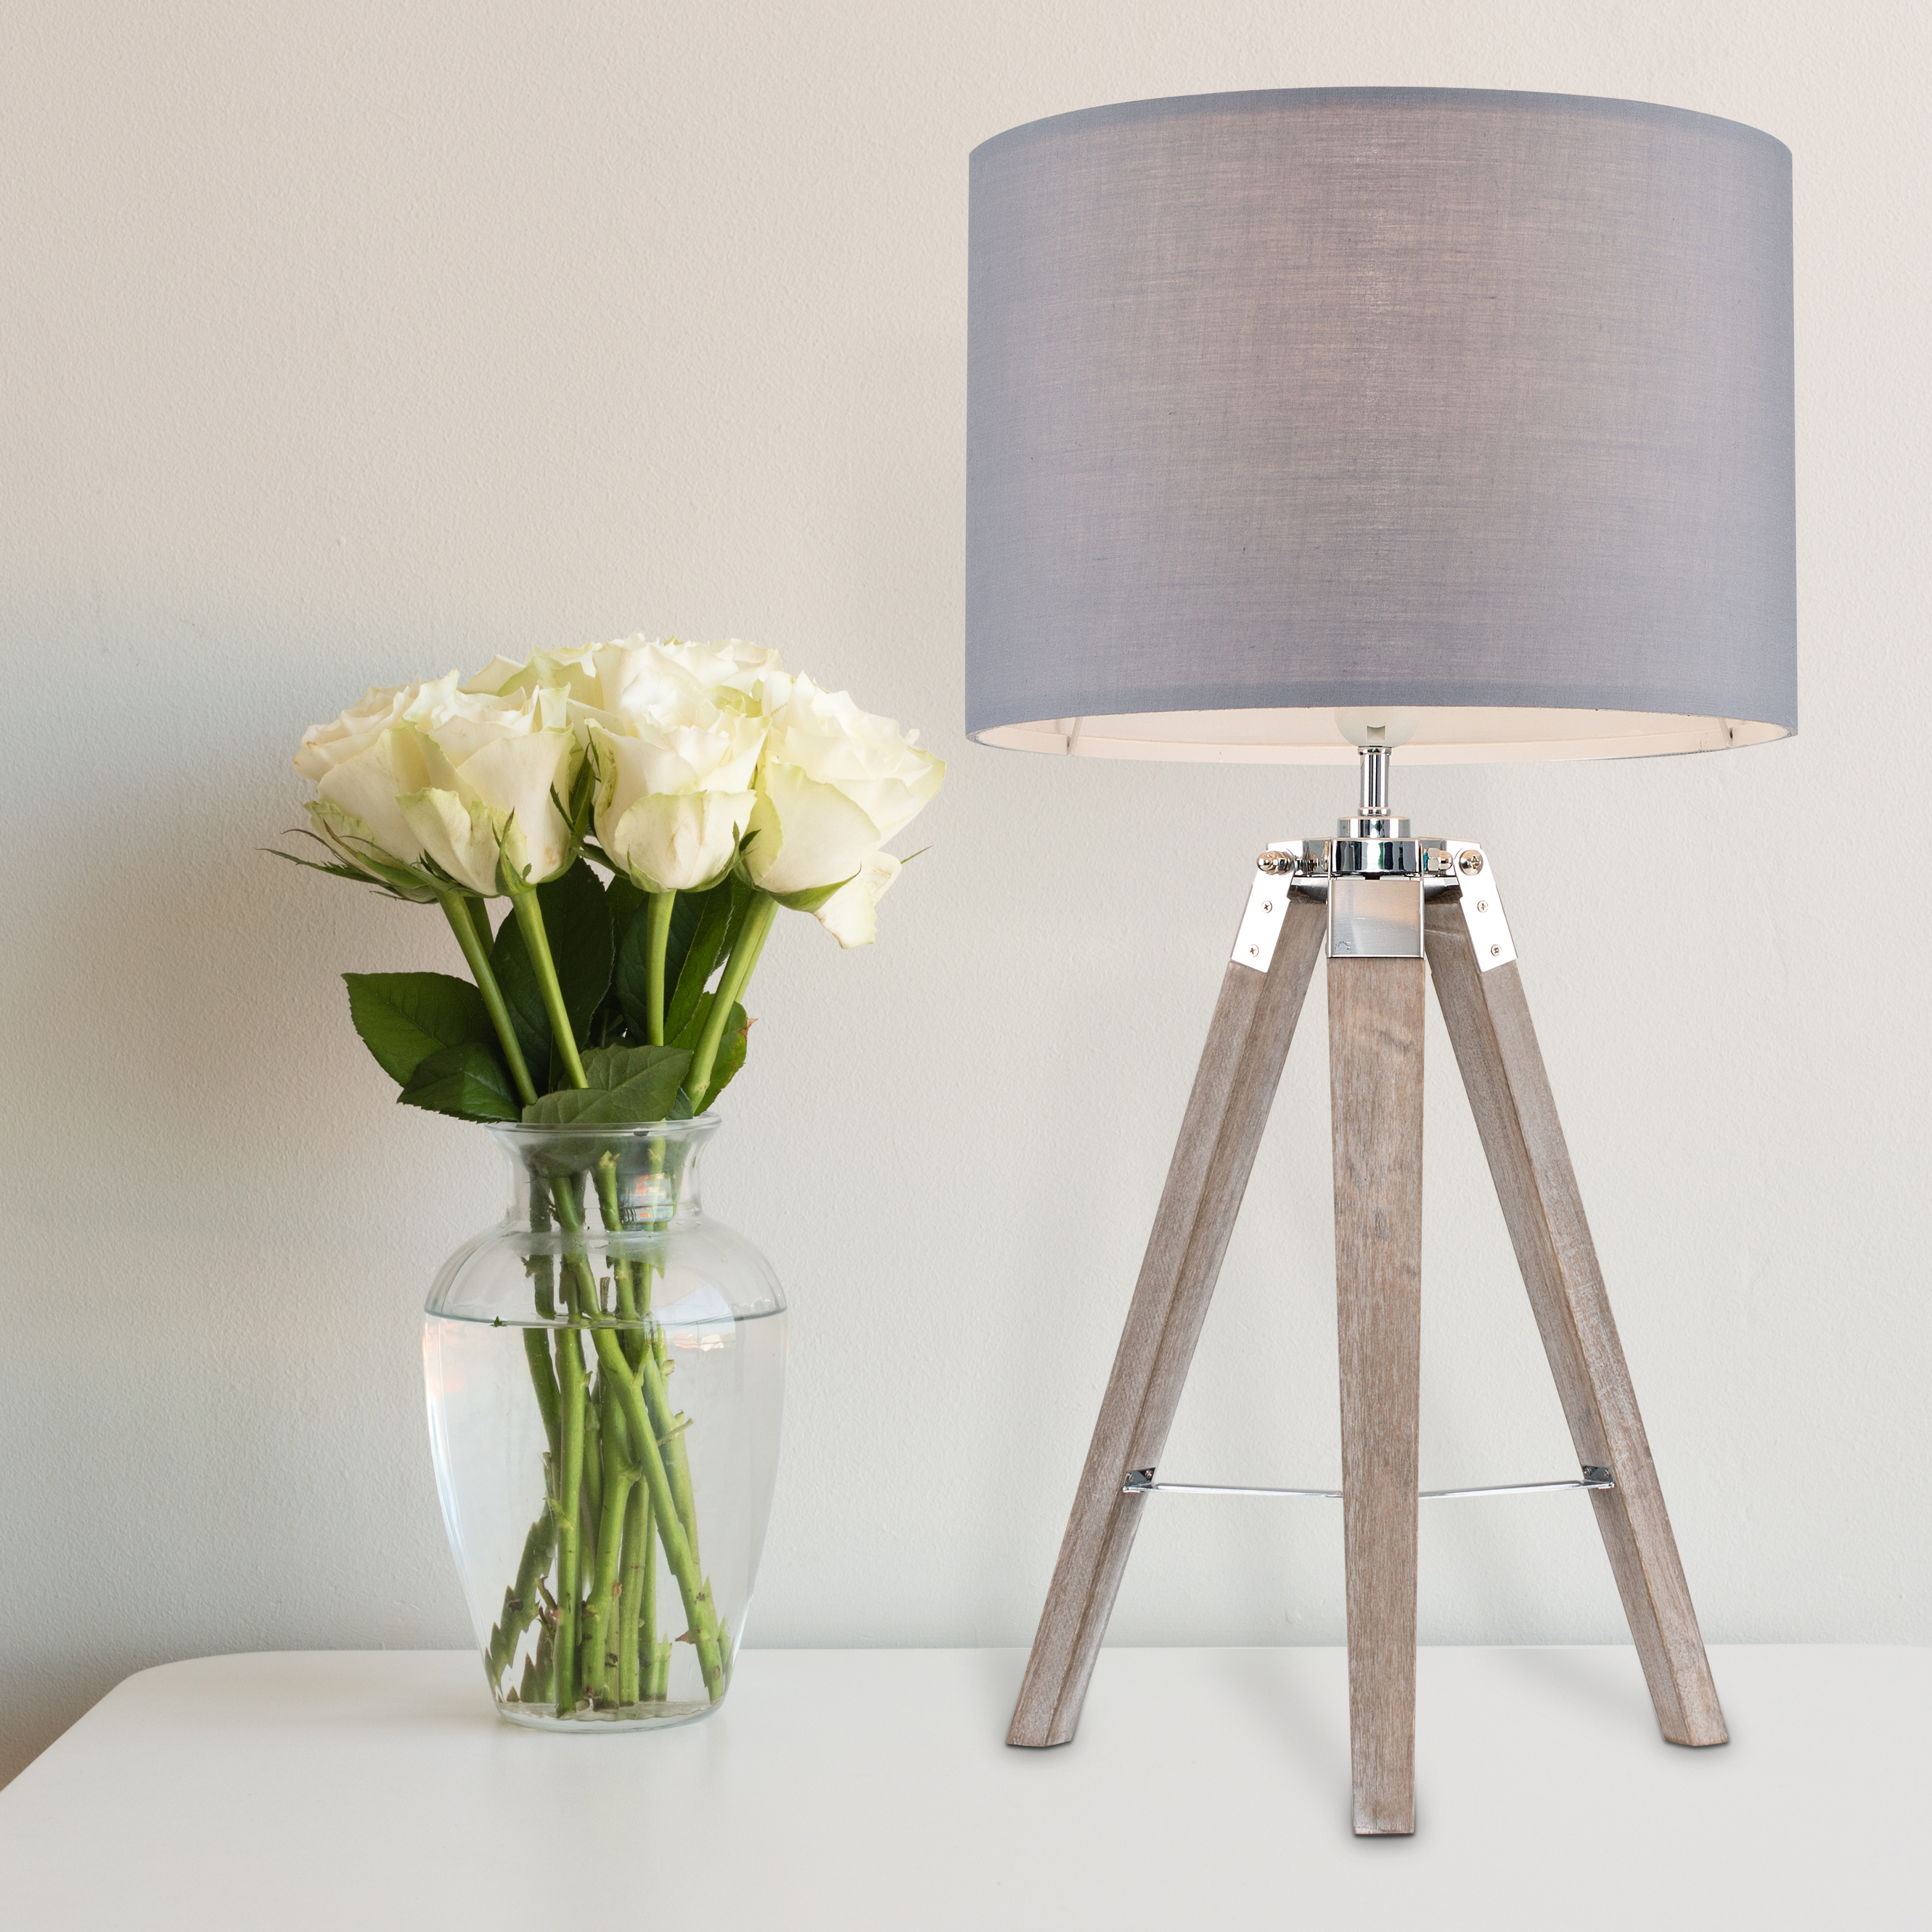 Light Wood Tripod Table Lamp With Grey, Grey Wood Table Lamp Base